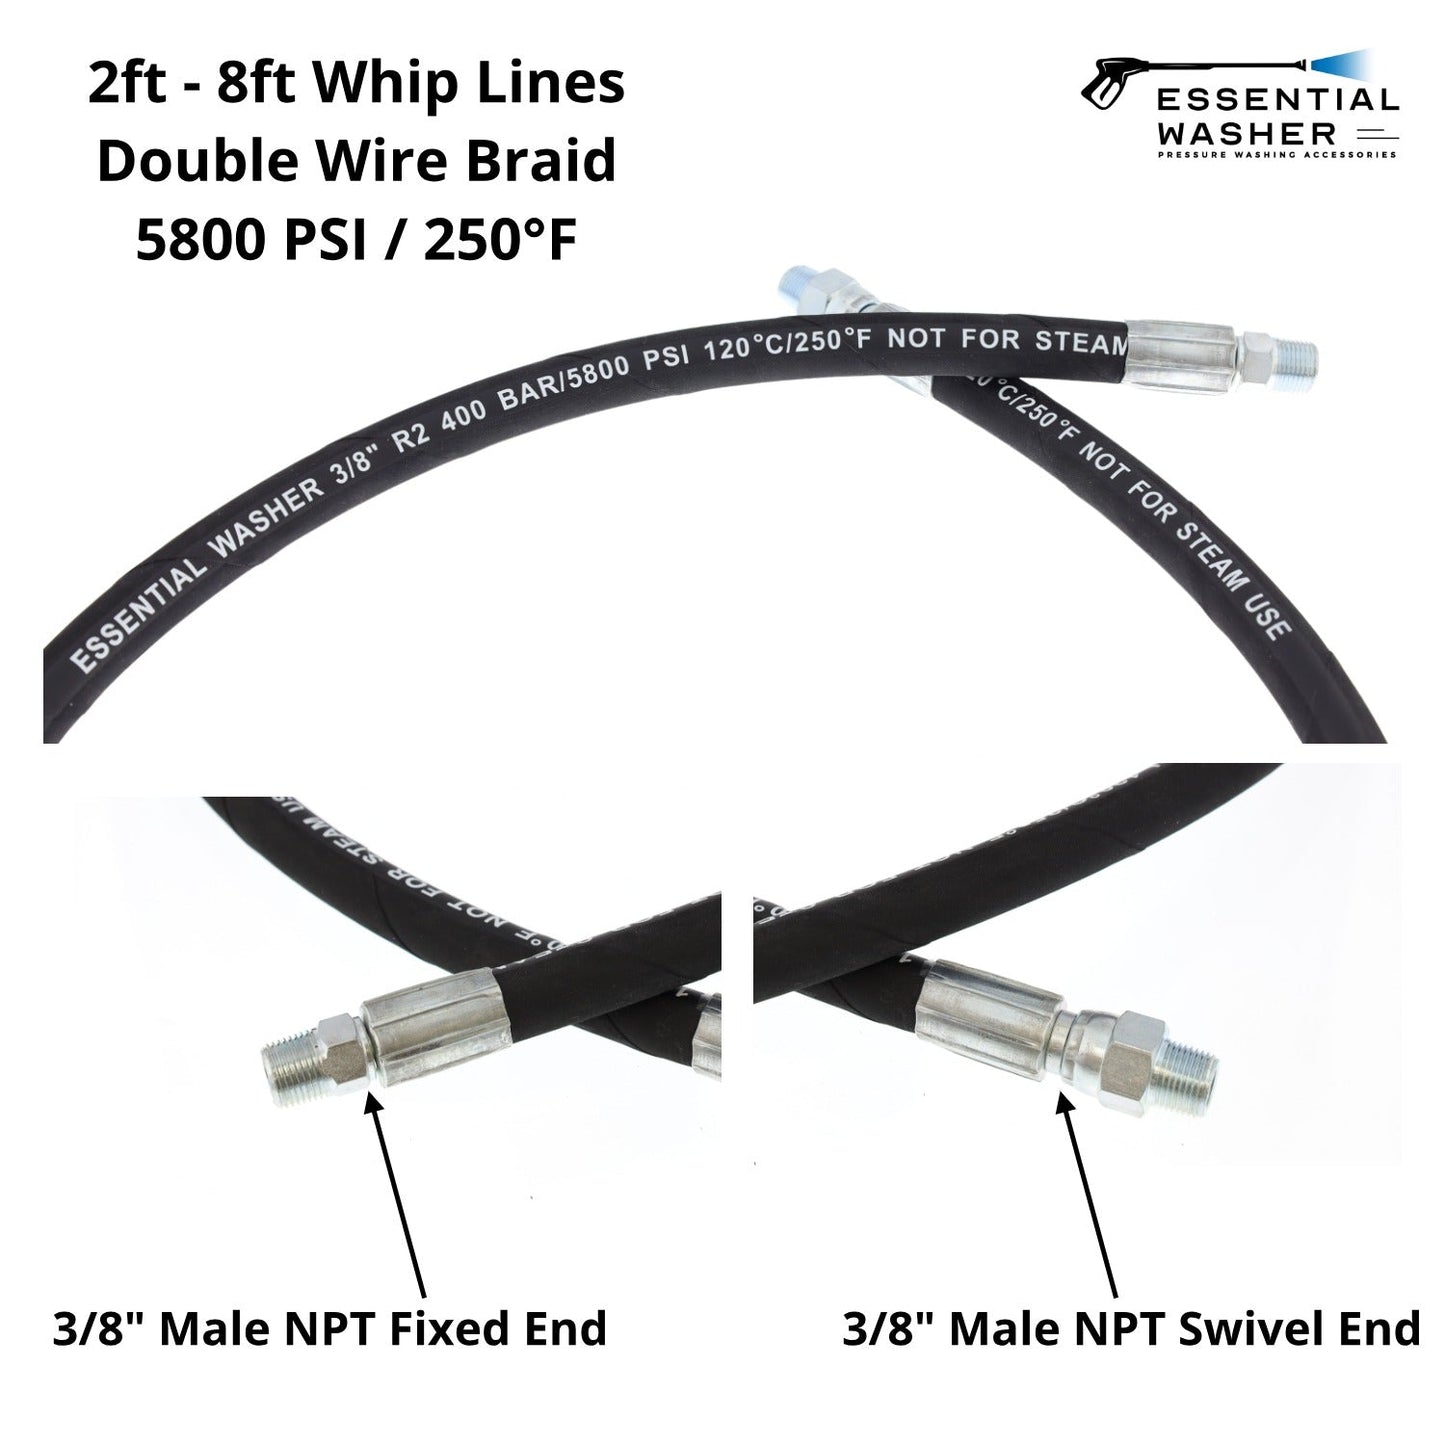 6 FT Whip Line for Pressure Washers | 3/8" 5800 PSI | Premium Commercial Grade Utility for Various Applications